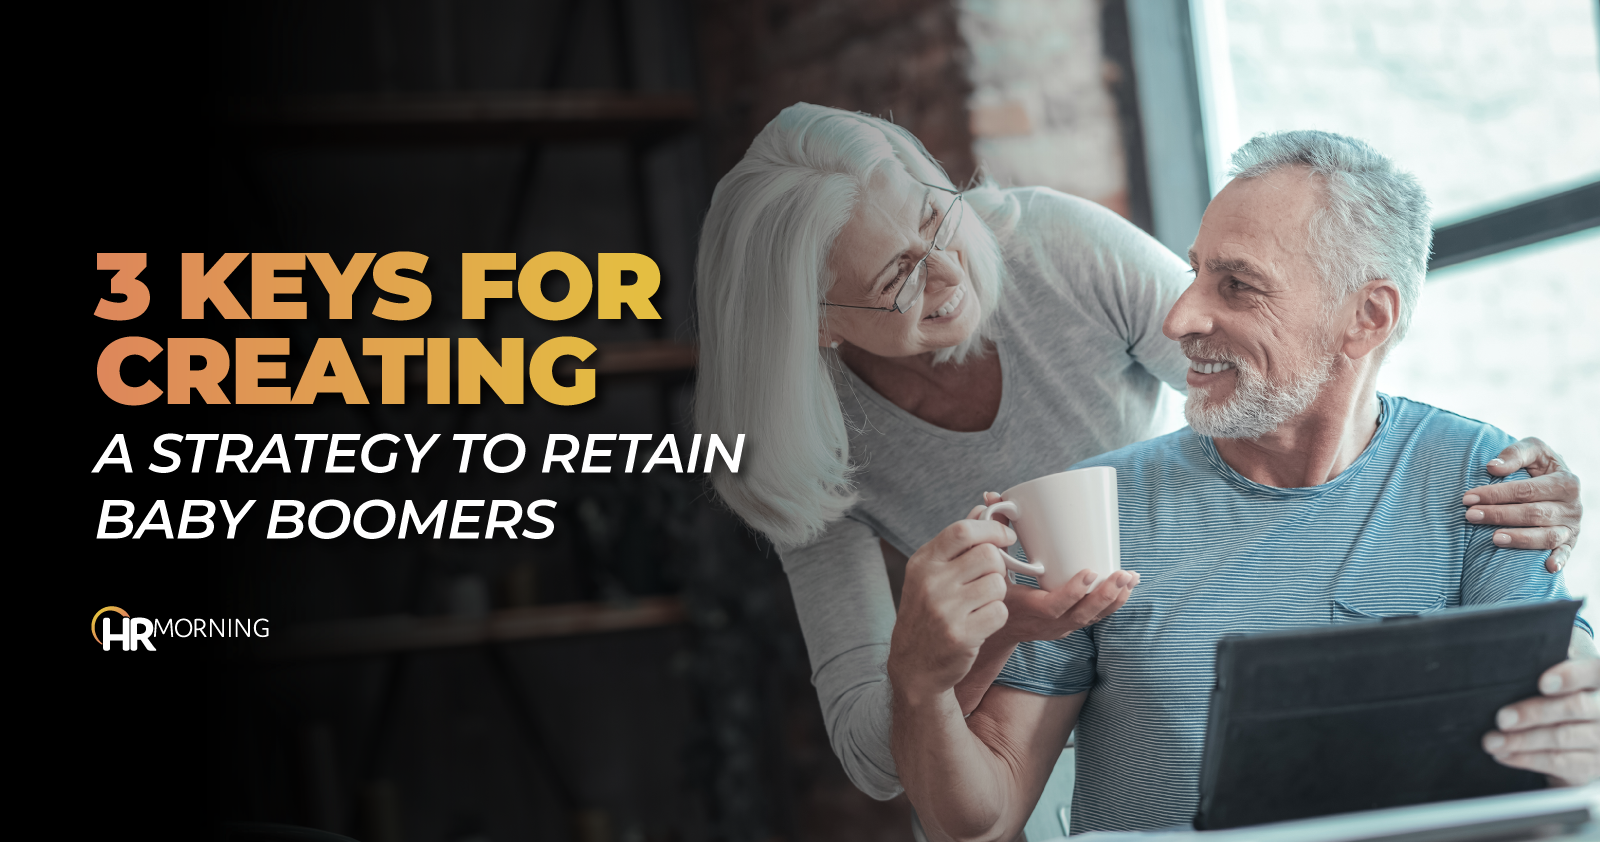 3 keys for creating a strategy to retain baby boomers